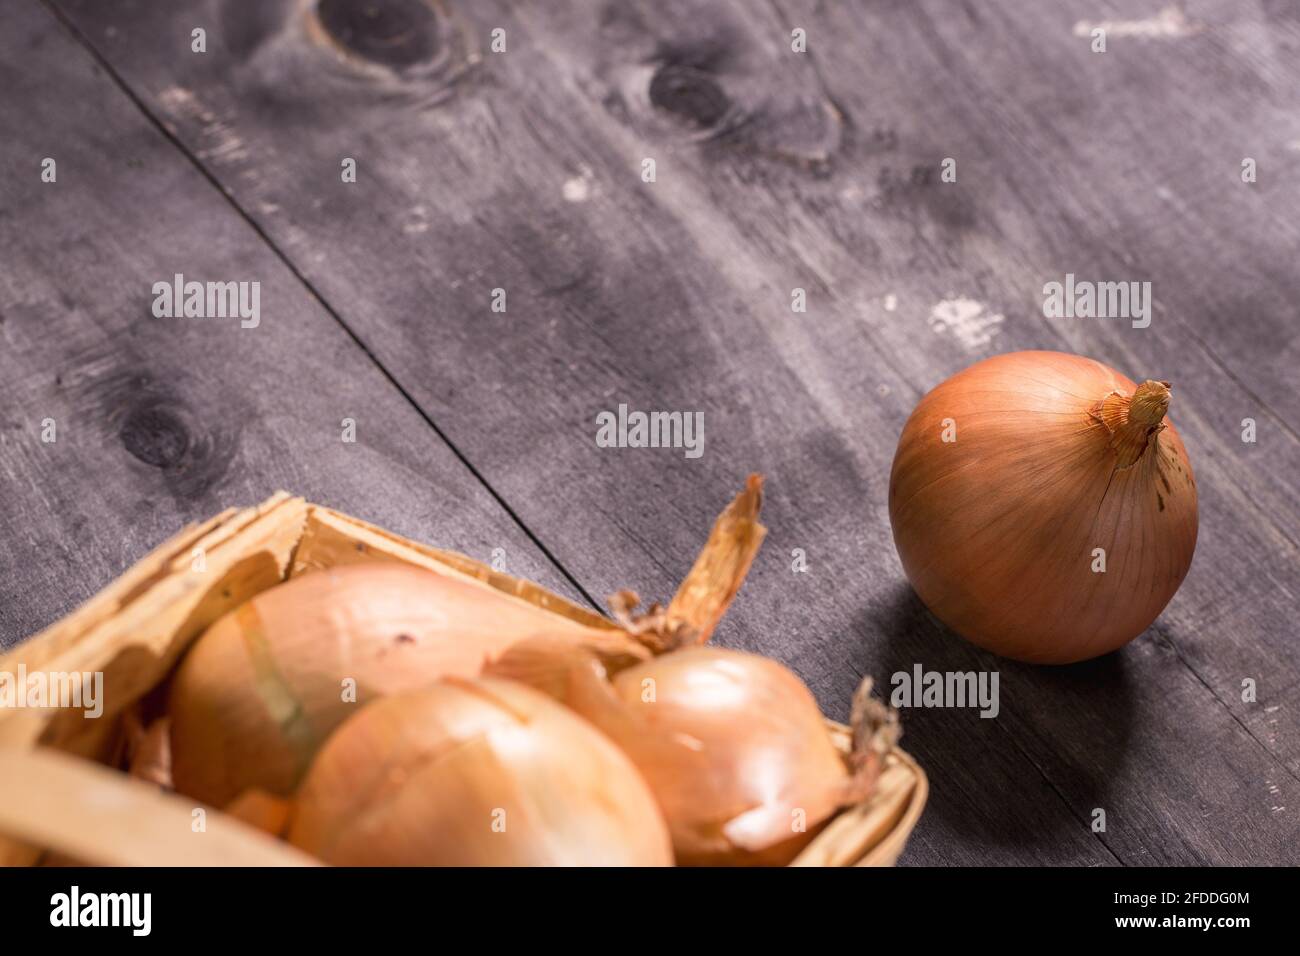 Brown onions in basket on wooden background. Stock Photo